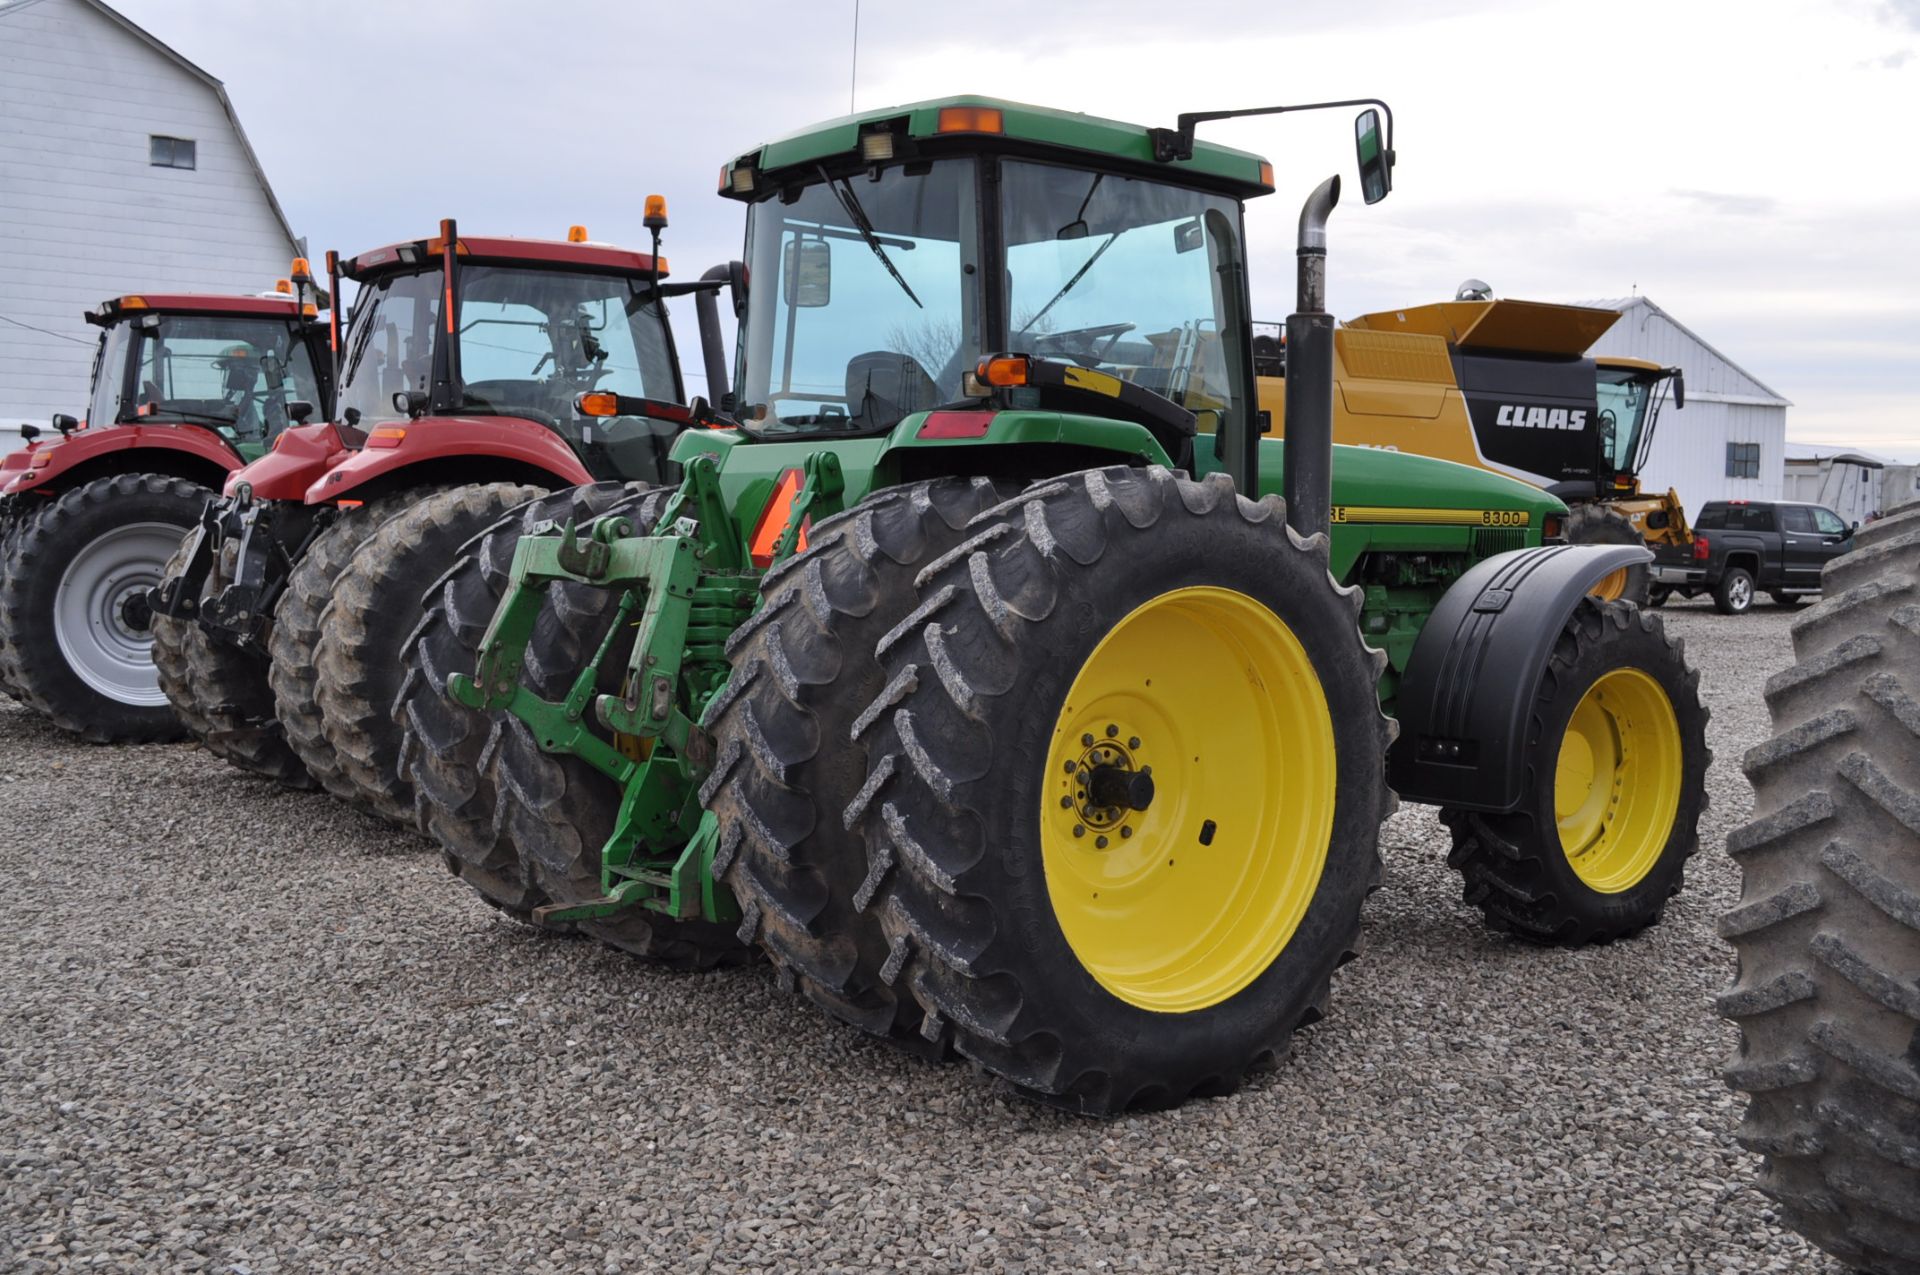 John Deere 8300 tractor, MFWD, 480/80 R 46 duals, 380/85 R 34 front, fenders, front wts, 4 hyd - Image 3 of 21